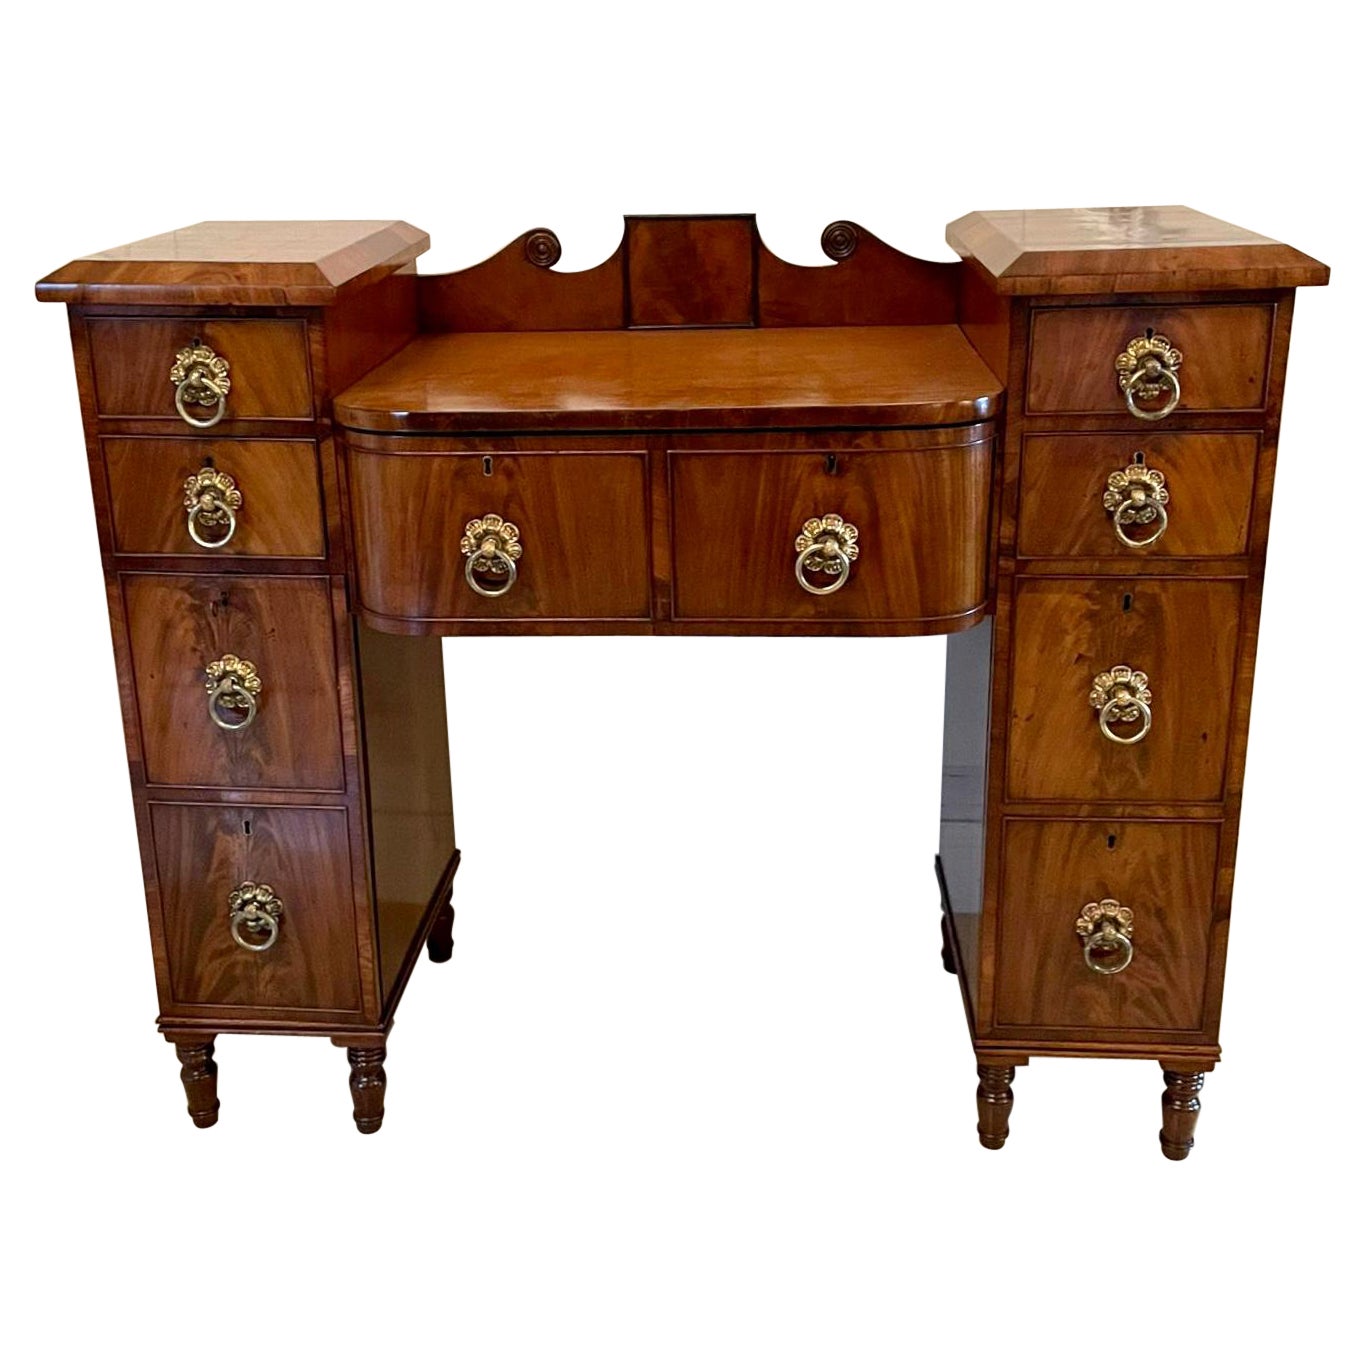 Rare Antique Regency Quality Mahogany Secretaire Sideboard For Sale